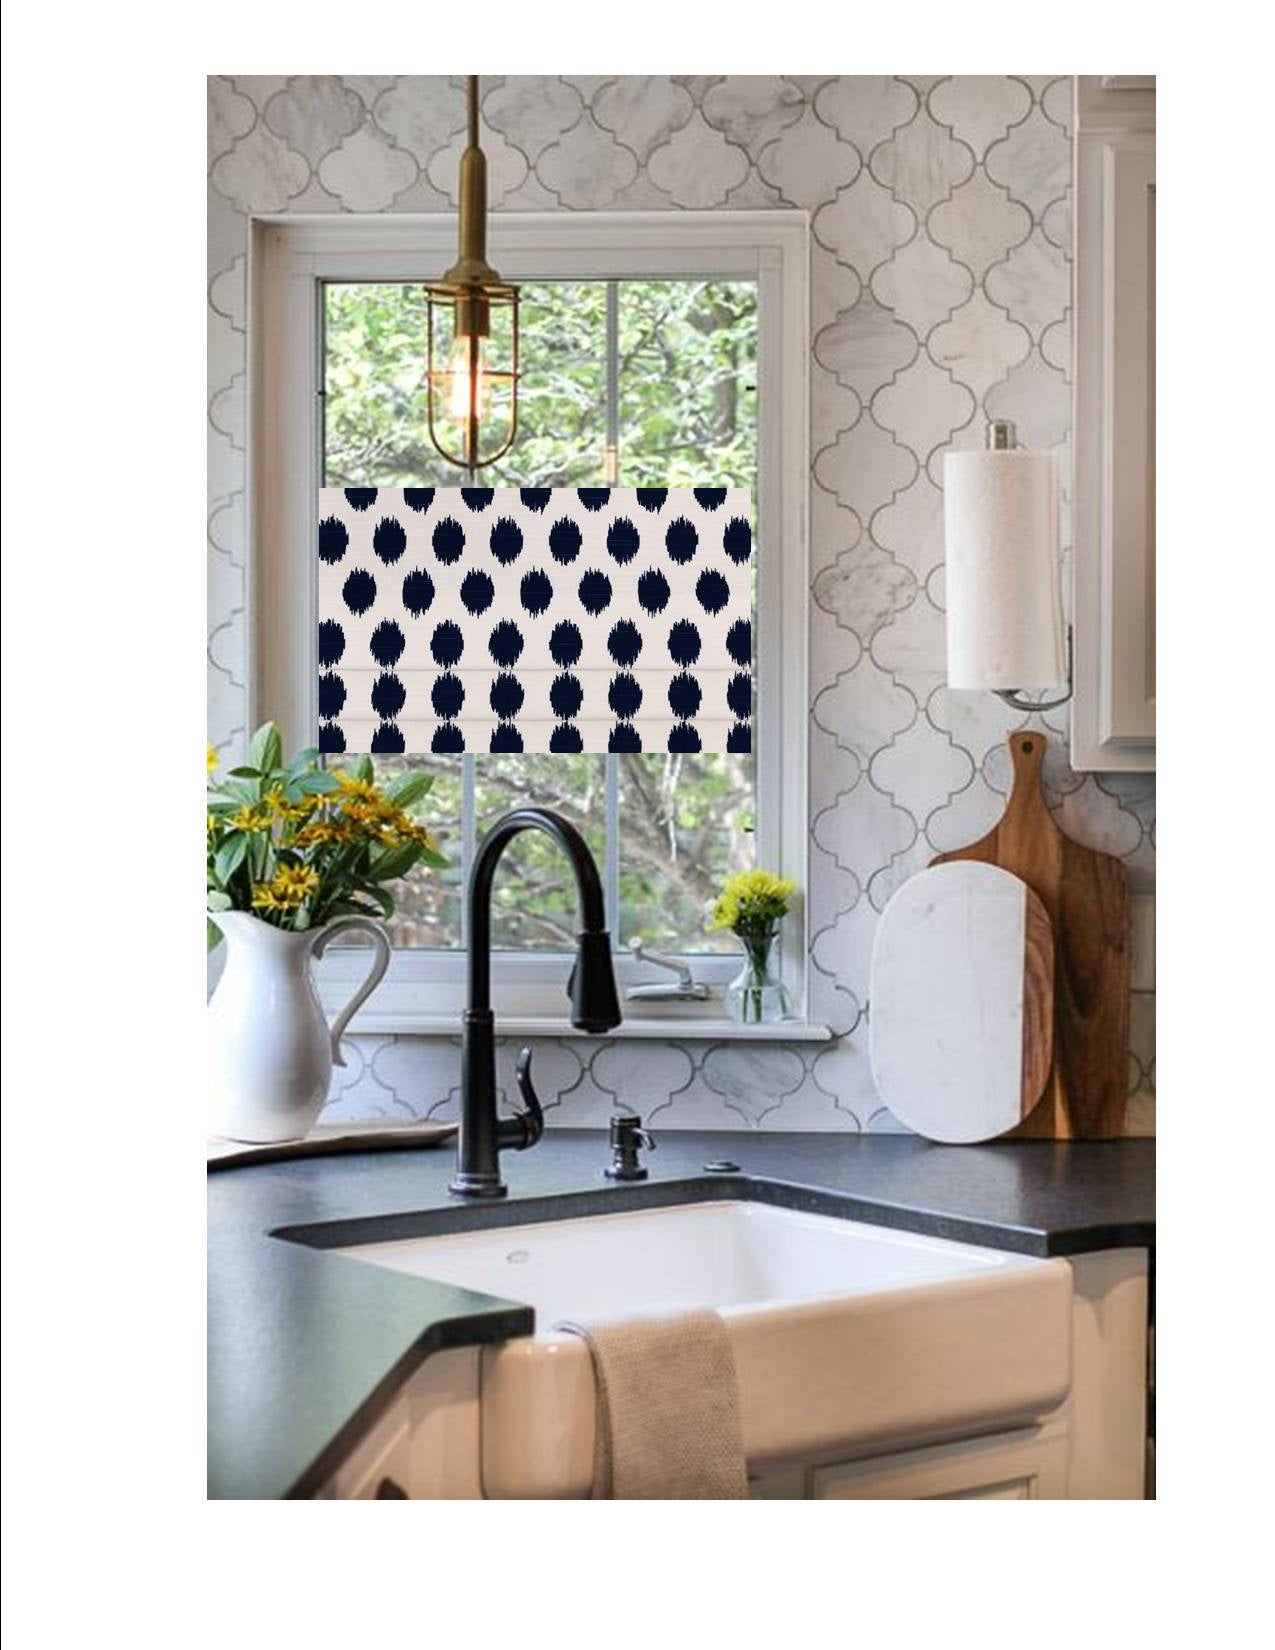 Faux Roman Shade Valance in Navy White Ikat Dots, Custom Made Fully Lined Modern Valance, Quick Ship Ready to Hang Kitchen Window Treatments